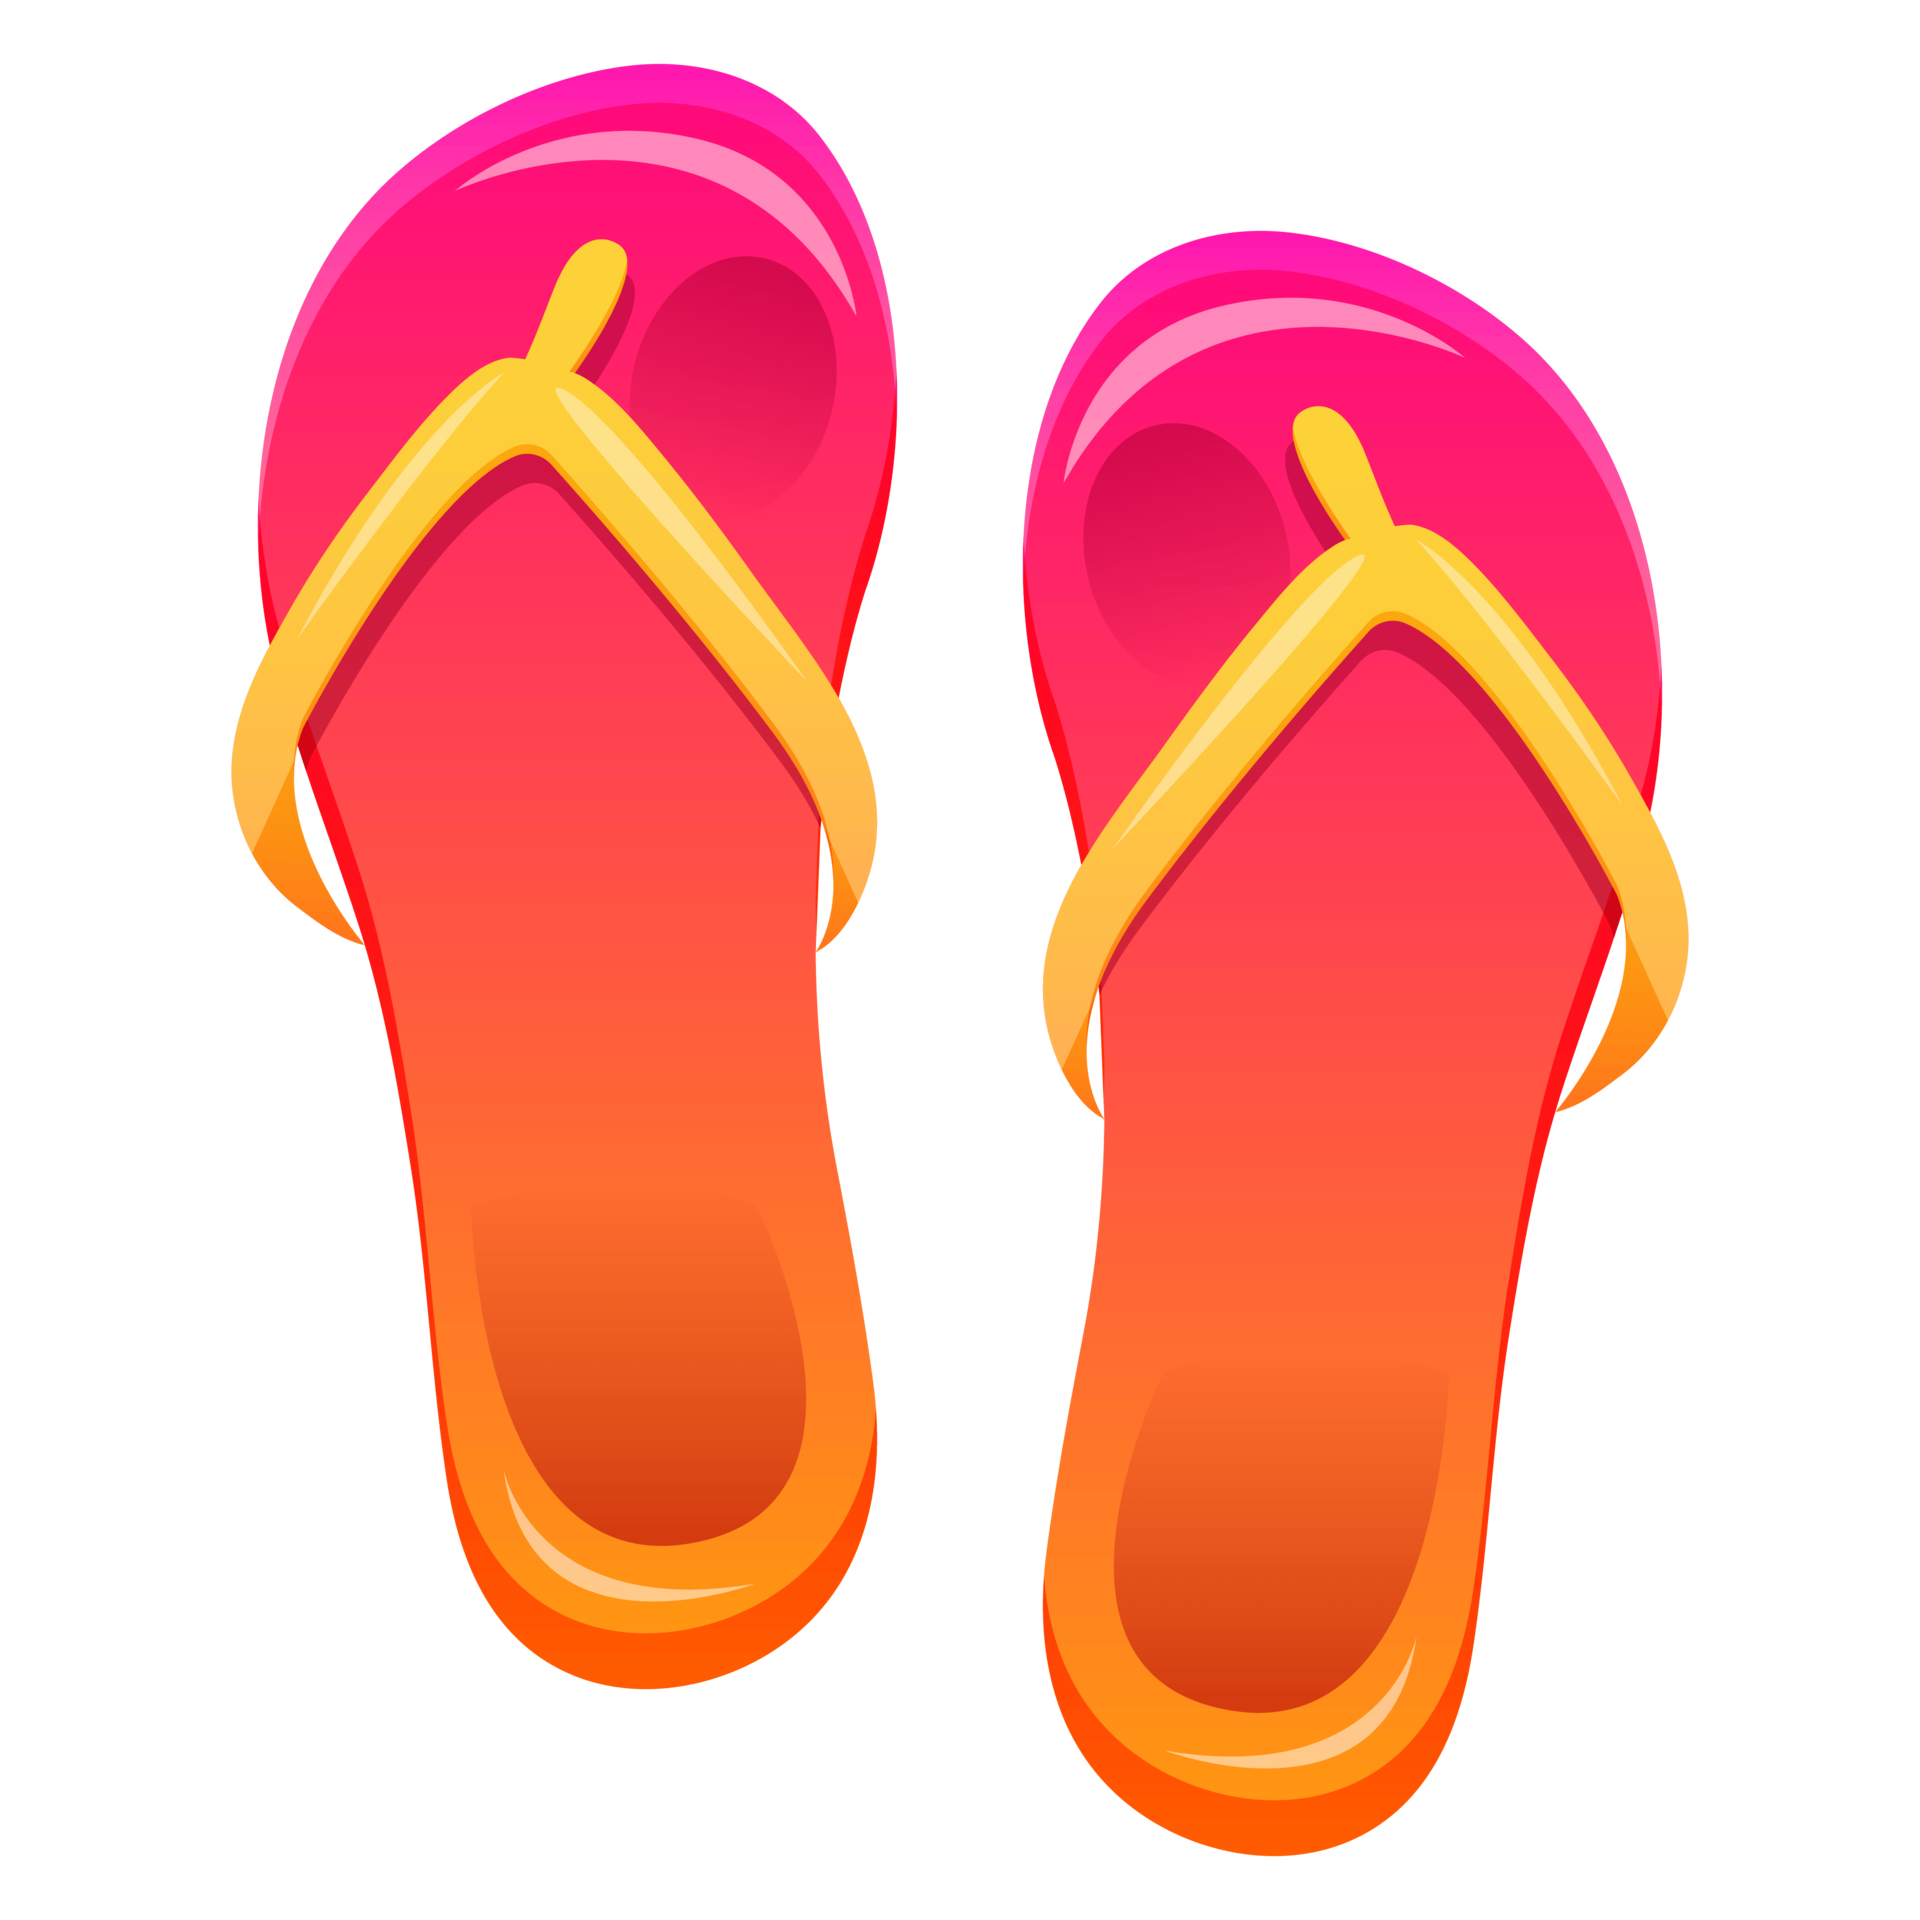 Pair of flip flop sandals. Isolated colorful summer flip flops swim ...